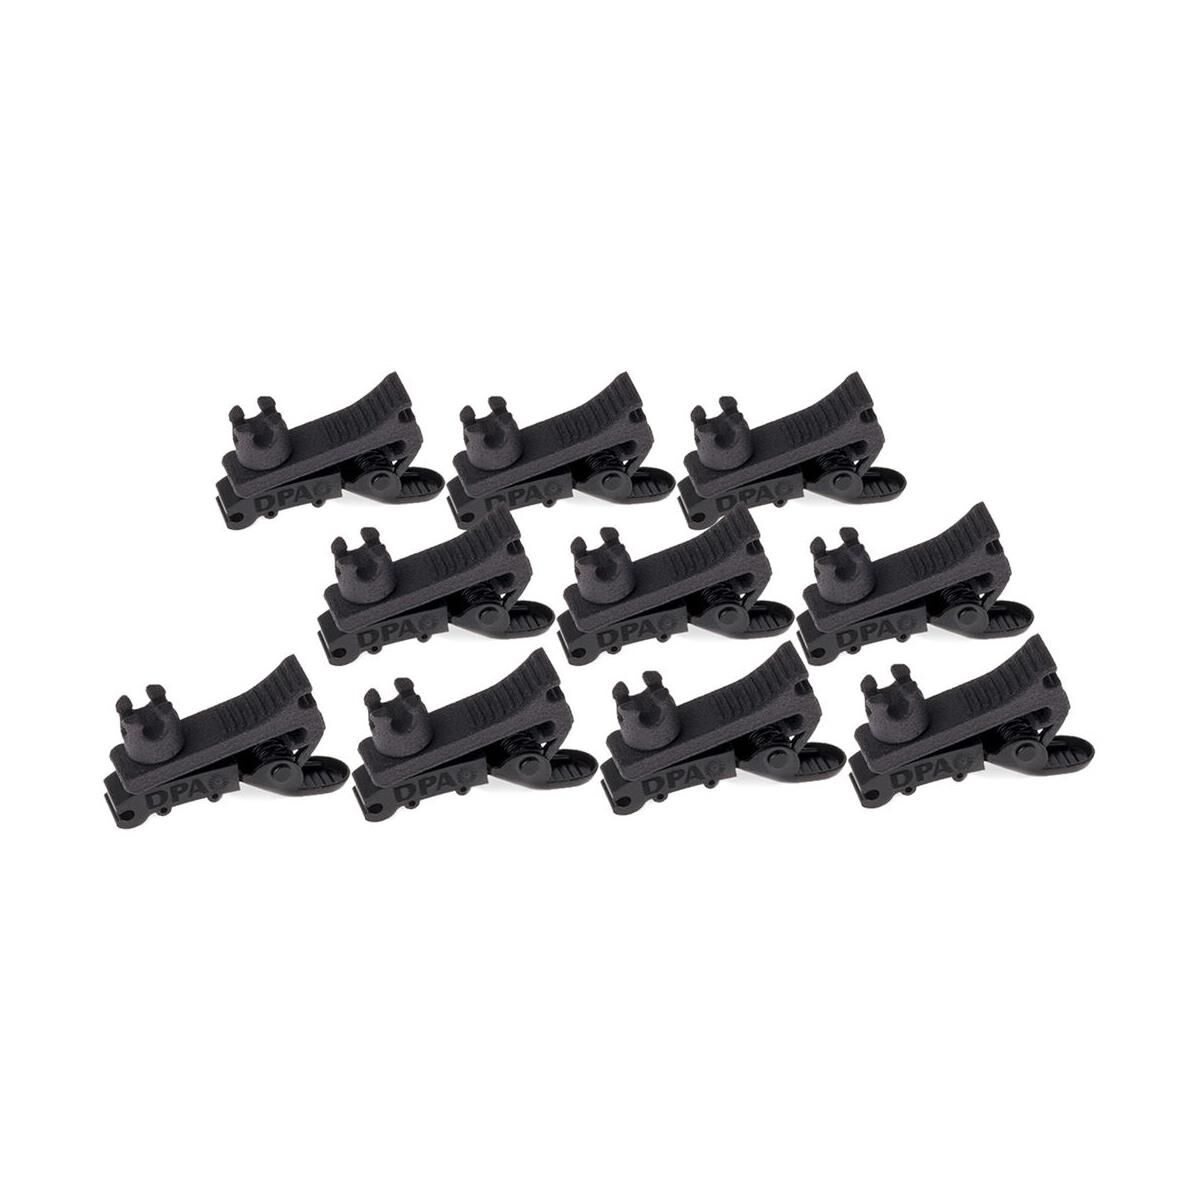 DPA Microphones 4-Way Clip for d:screet Lavalier Microphones, 10 Pack, Black